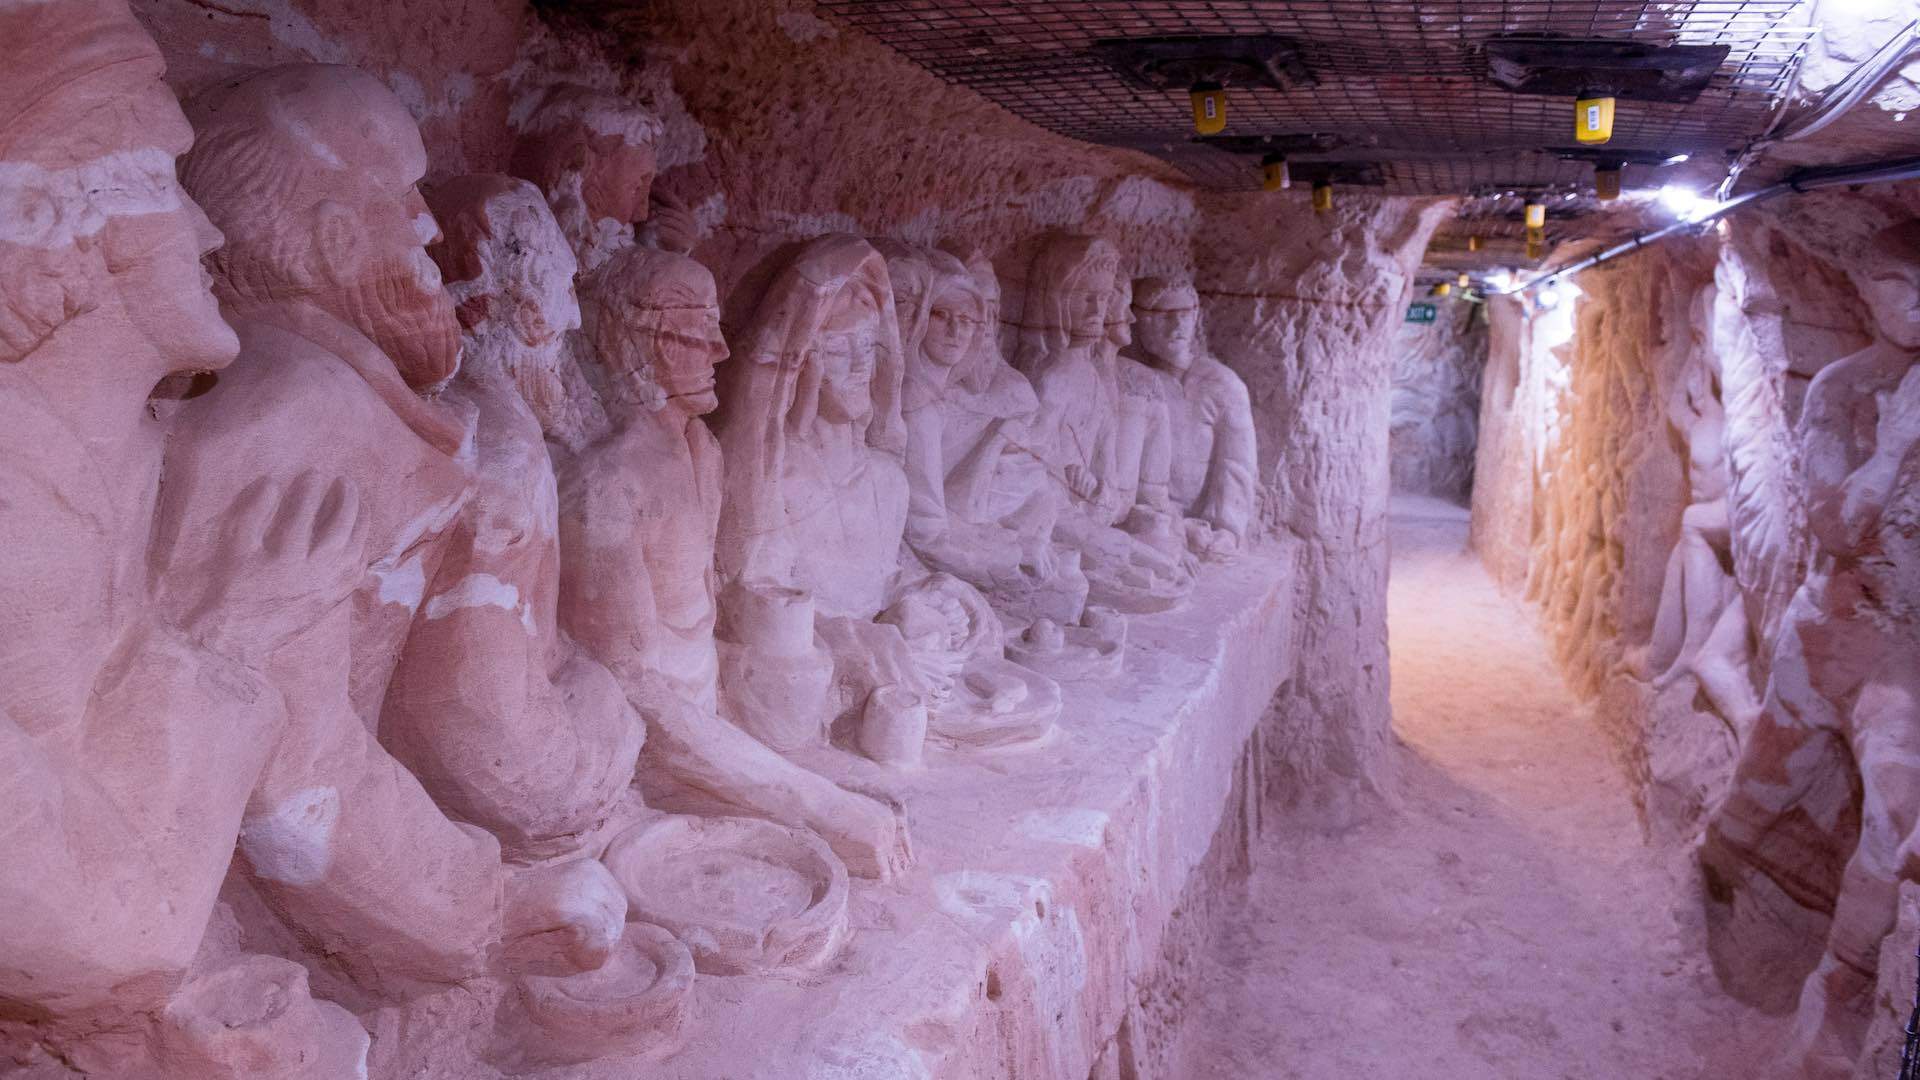 Chambers of the Black Hand - A former opal mine turned into an art gallery with several sculptures carved into the mine walls - Lightning Ridge, New South Wales, Australia